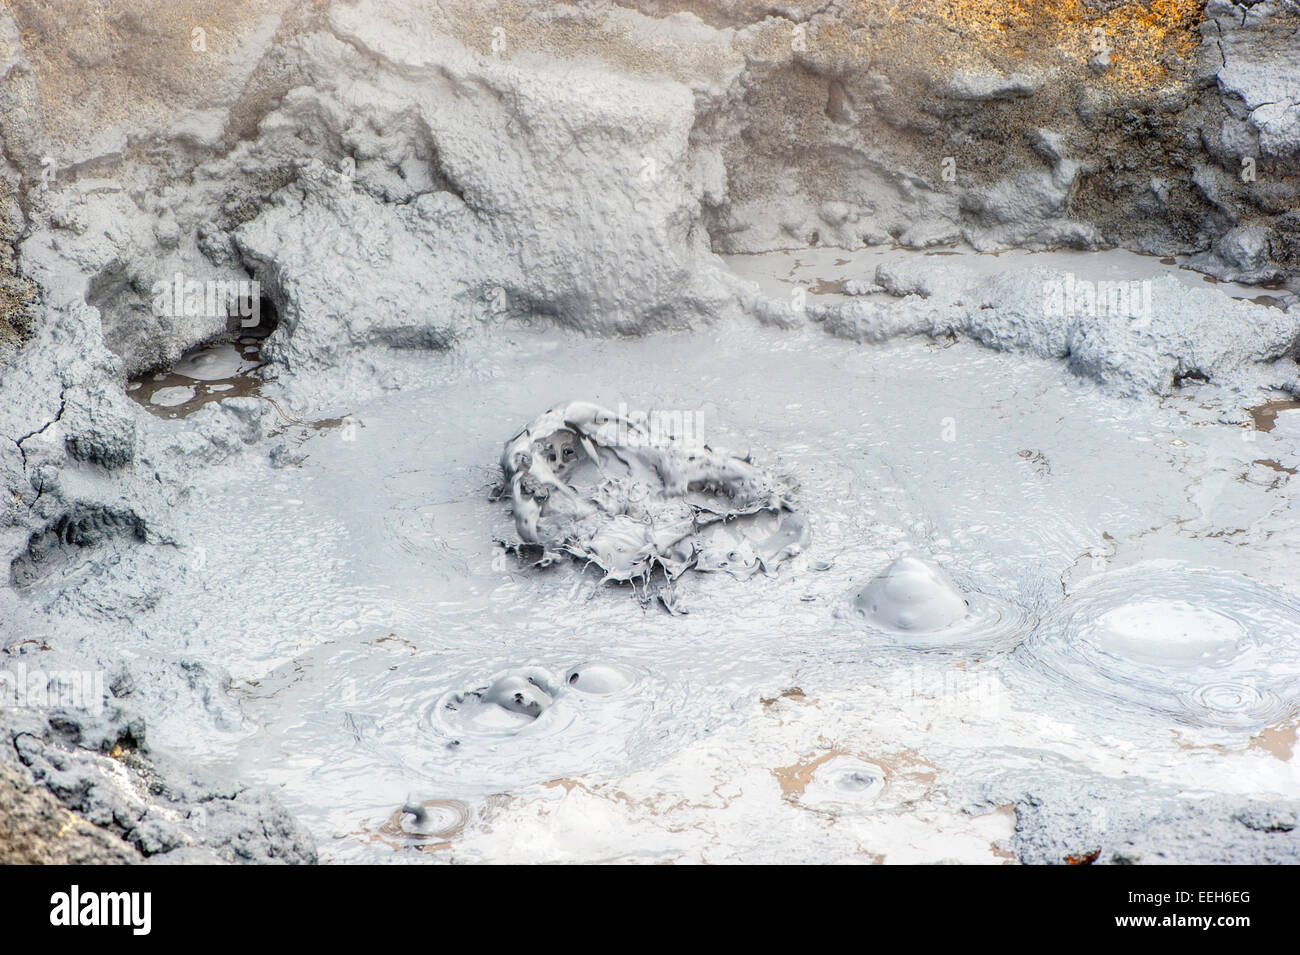 Boiling mud hole in northern Namafjall Iceland. Stock Photo